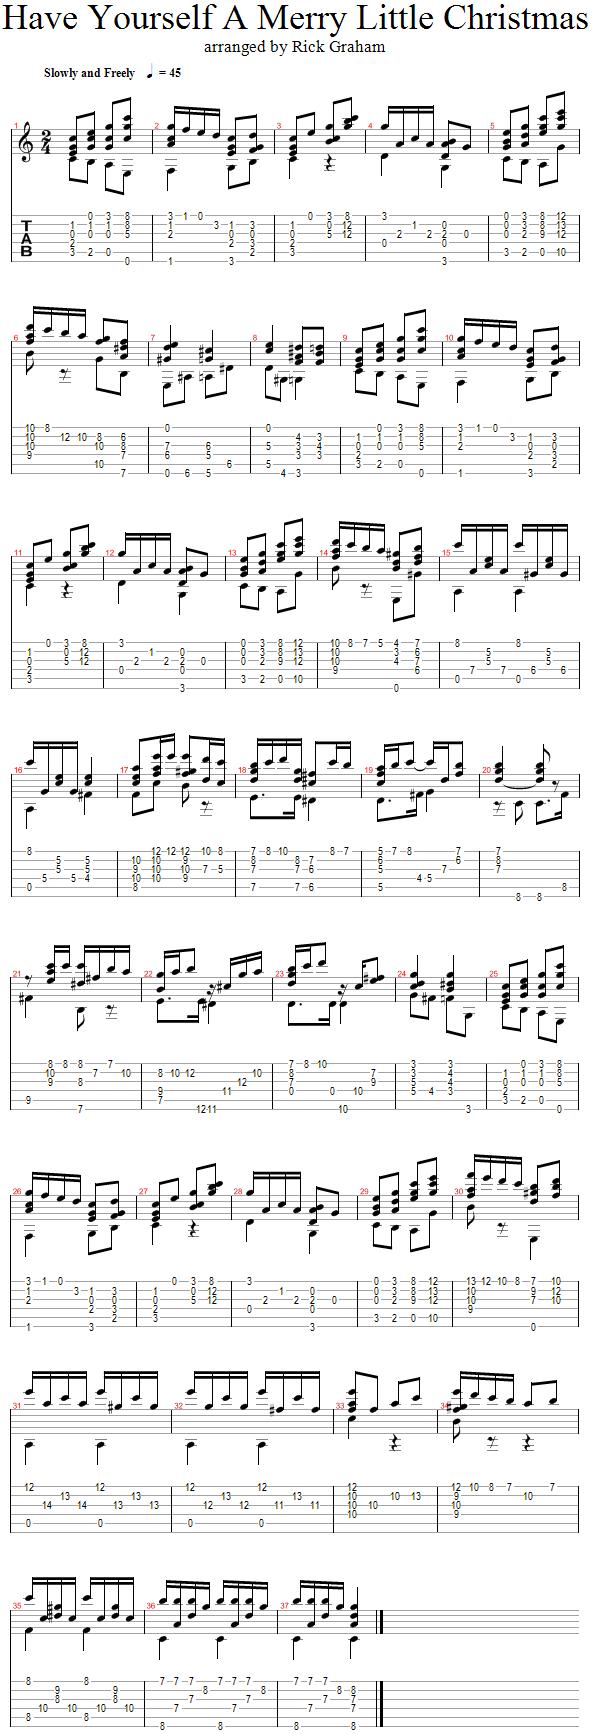 Tablature for Have Yourself a Merry Little Christmas - Solo